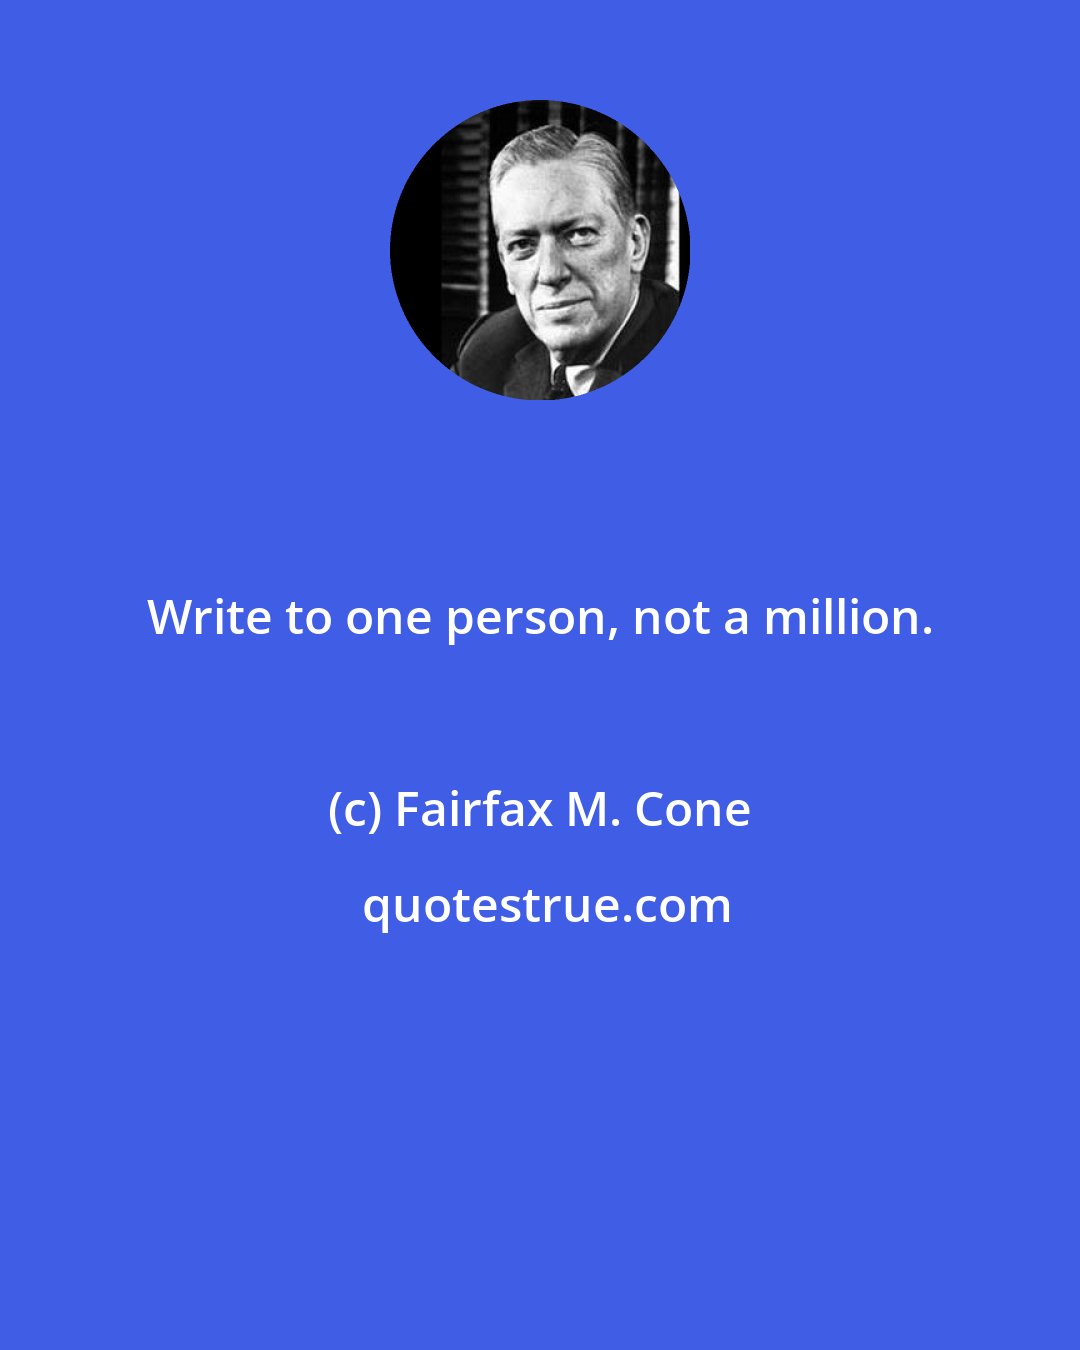 Fairfax M. Cone: Write to one person, not a million.